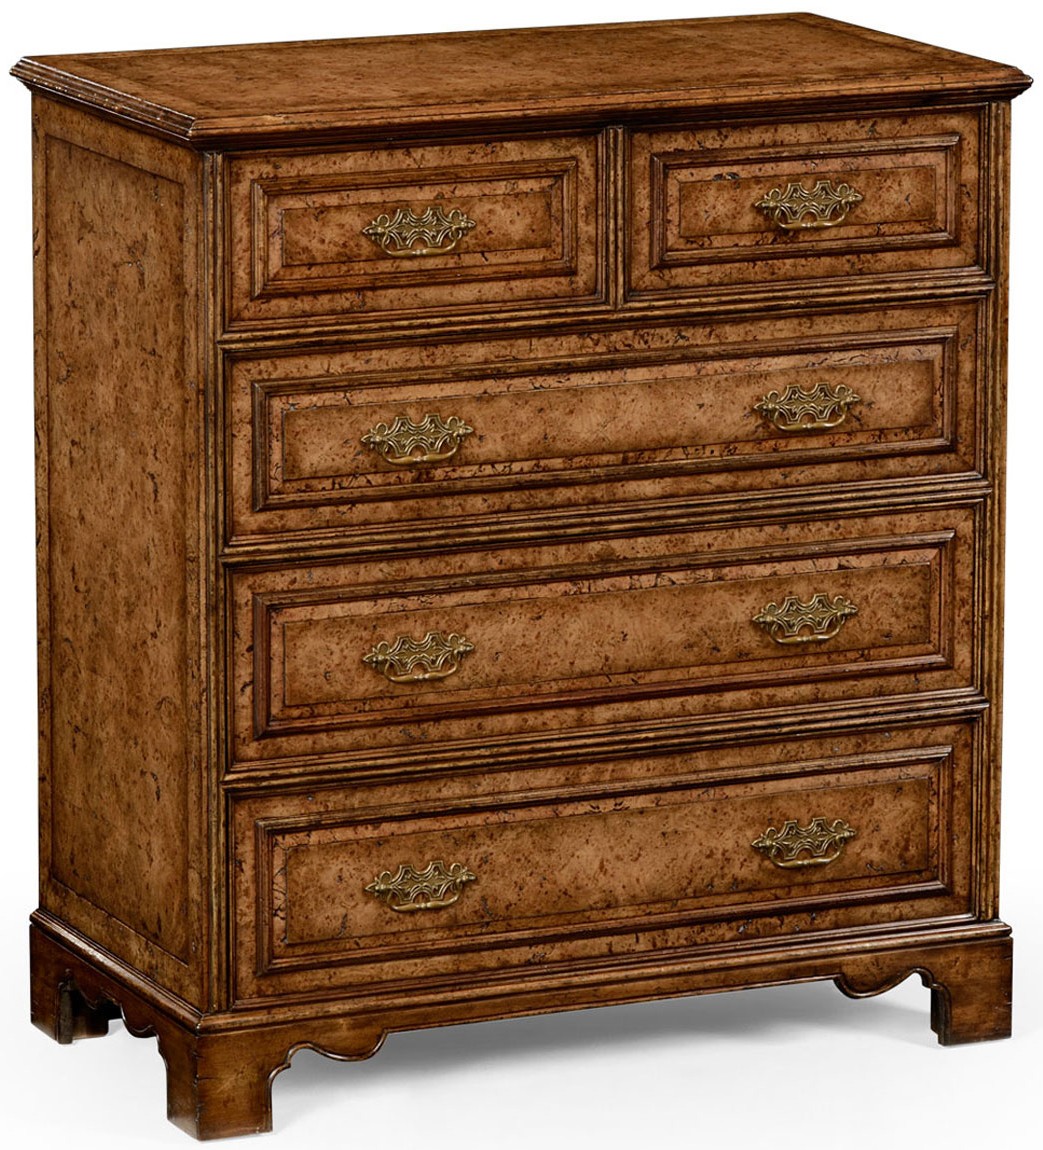 Chest of Drawers George II style burl oak chest drawers